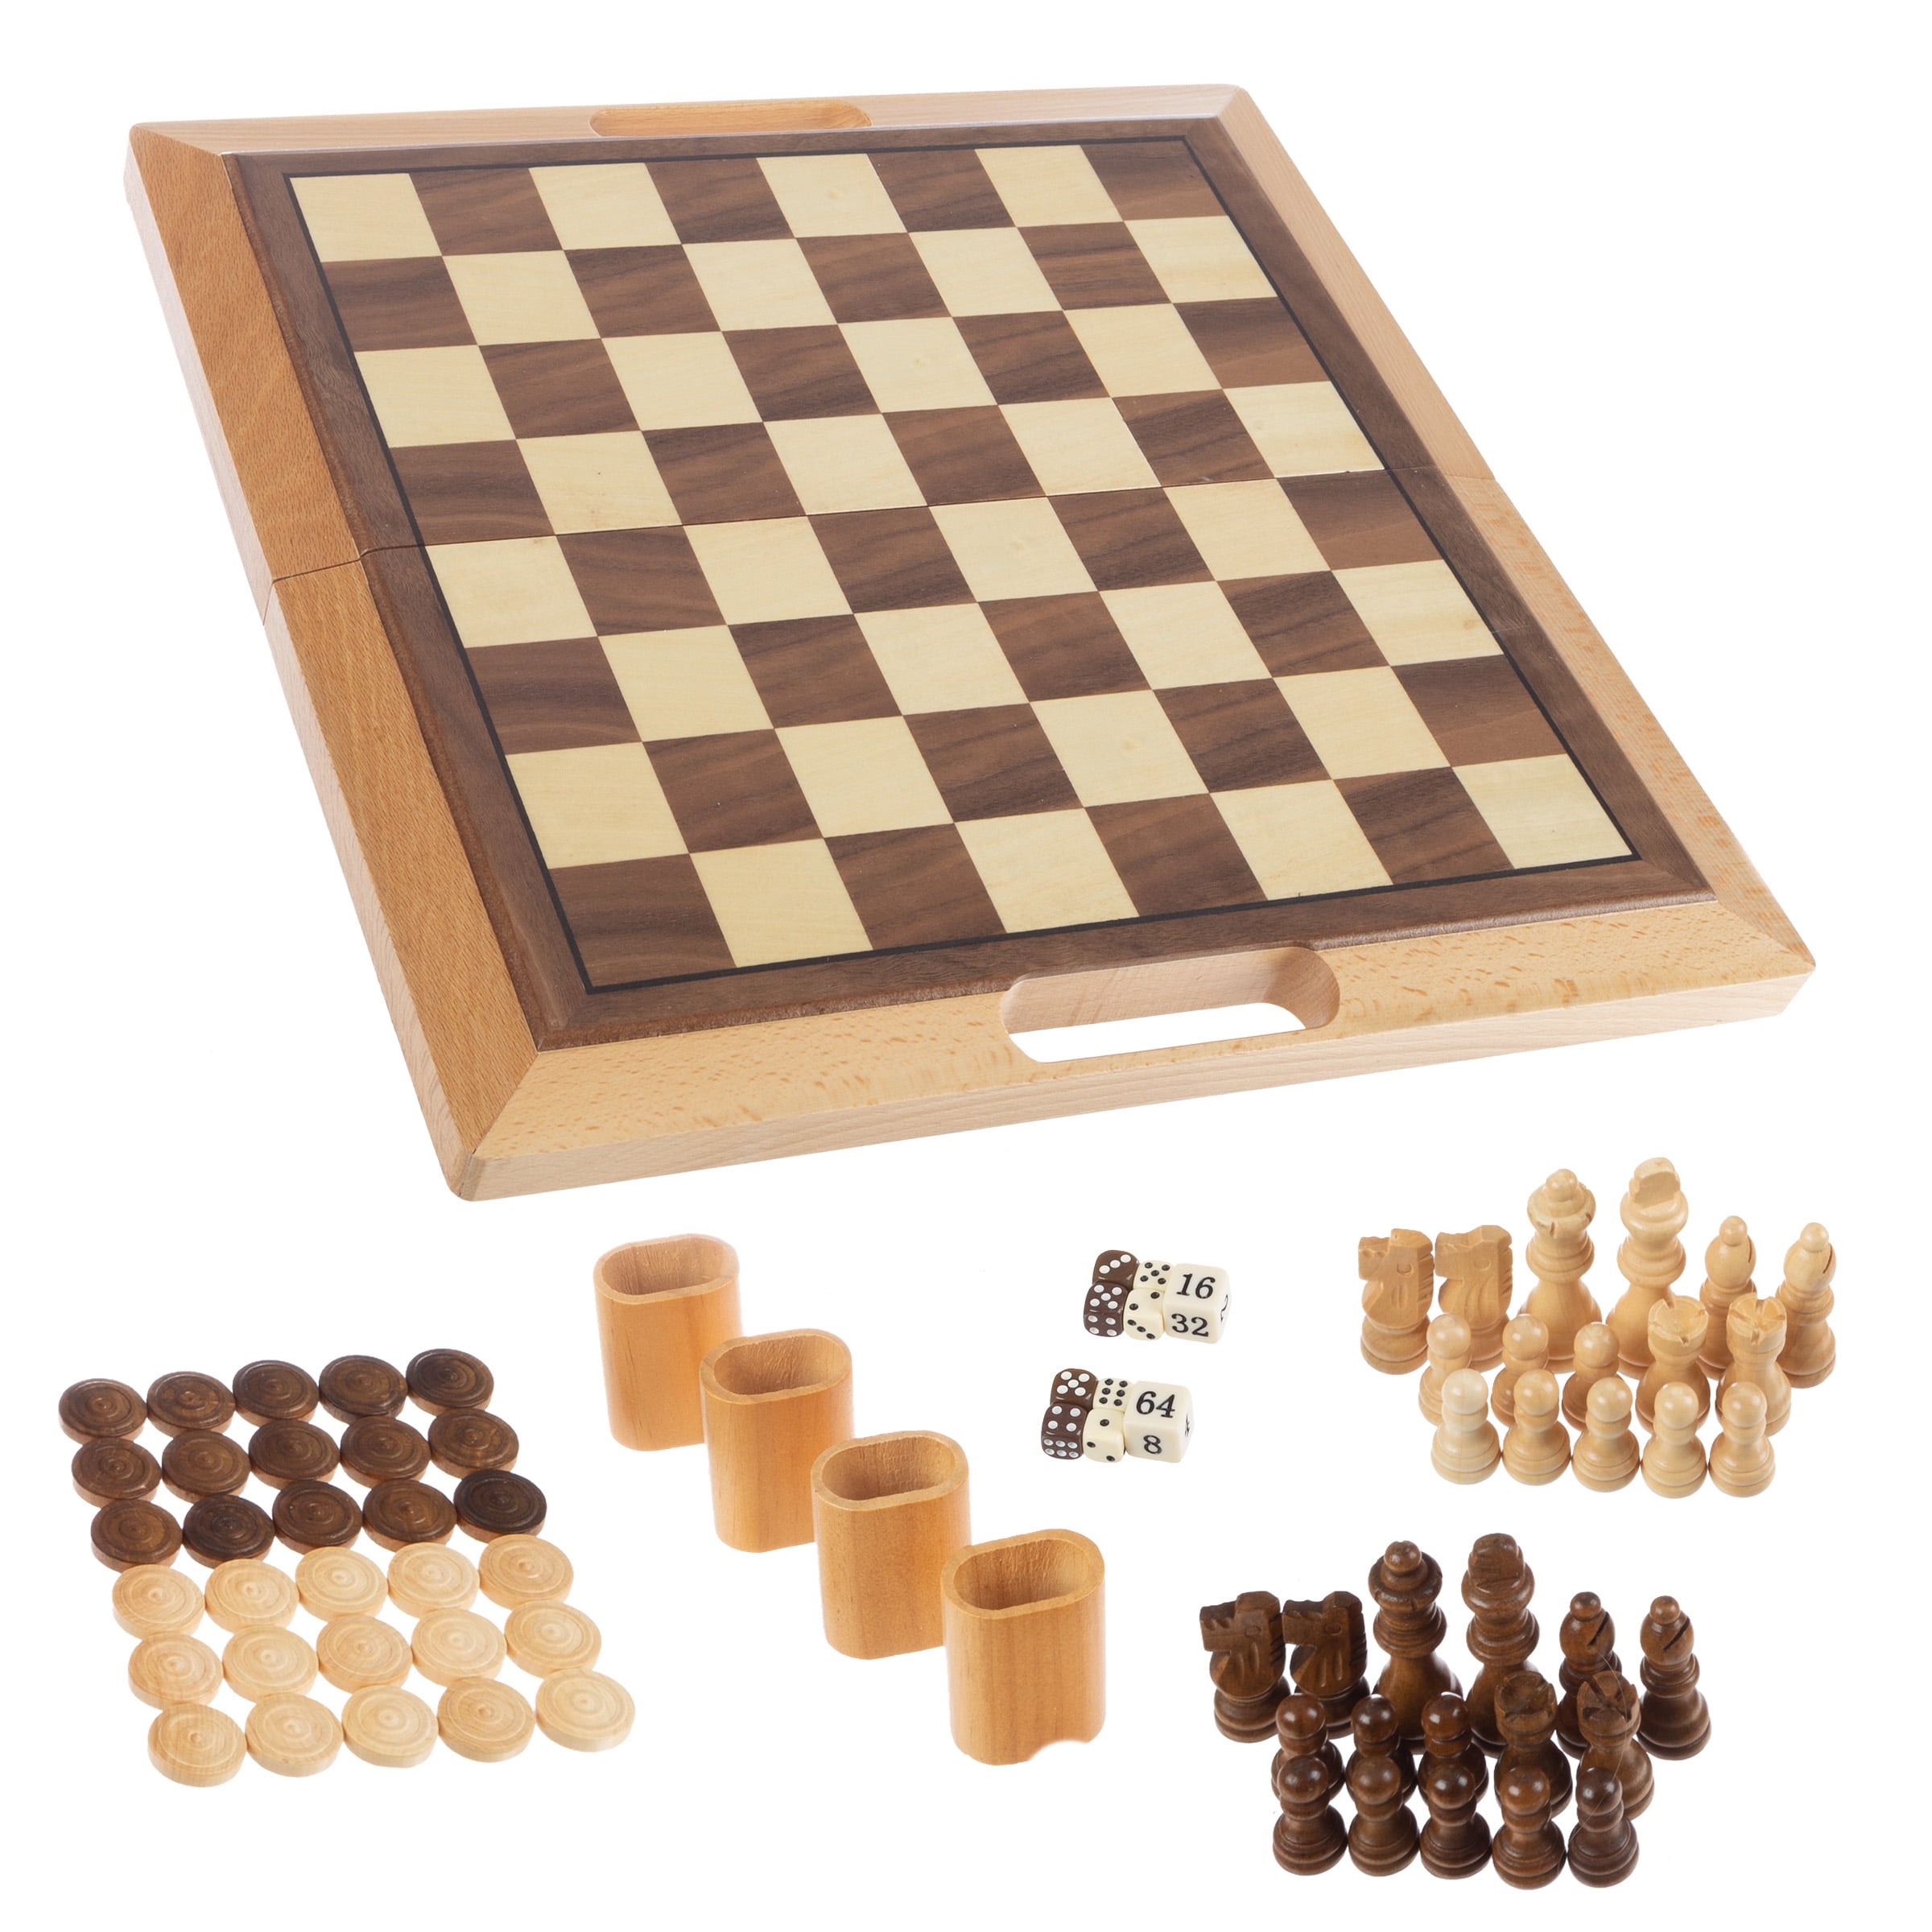 Deluxe Wooden Chess Backgammon Table Set Outdoor Games Game Room Tables Durable 